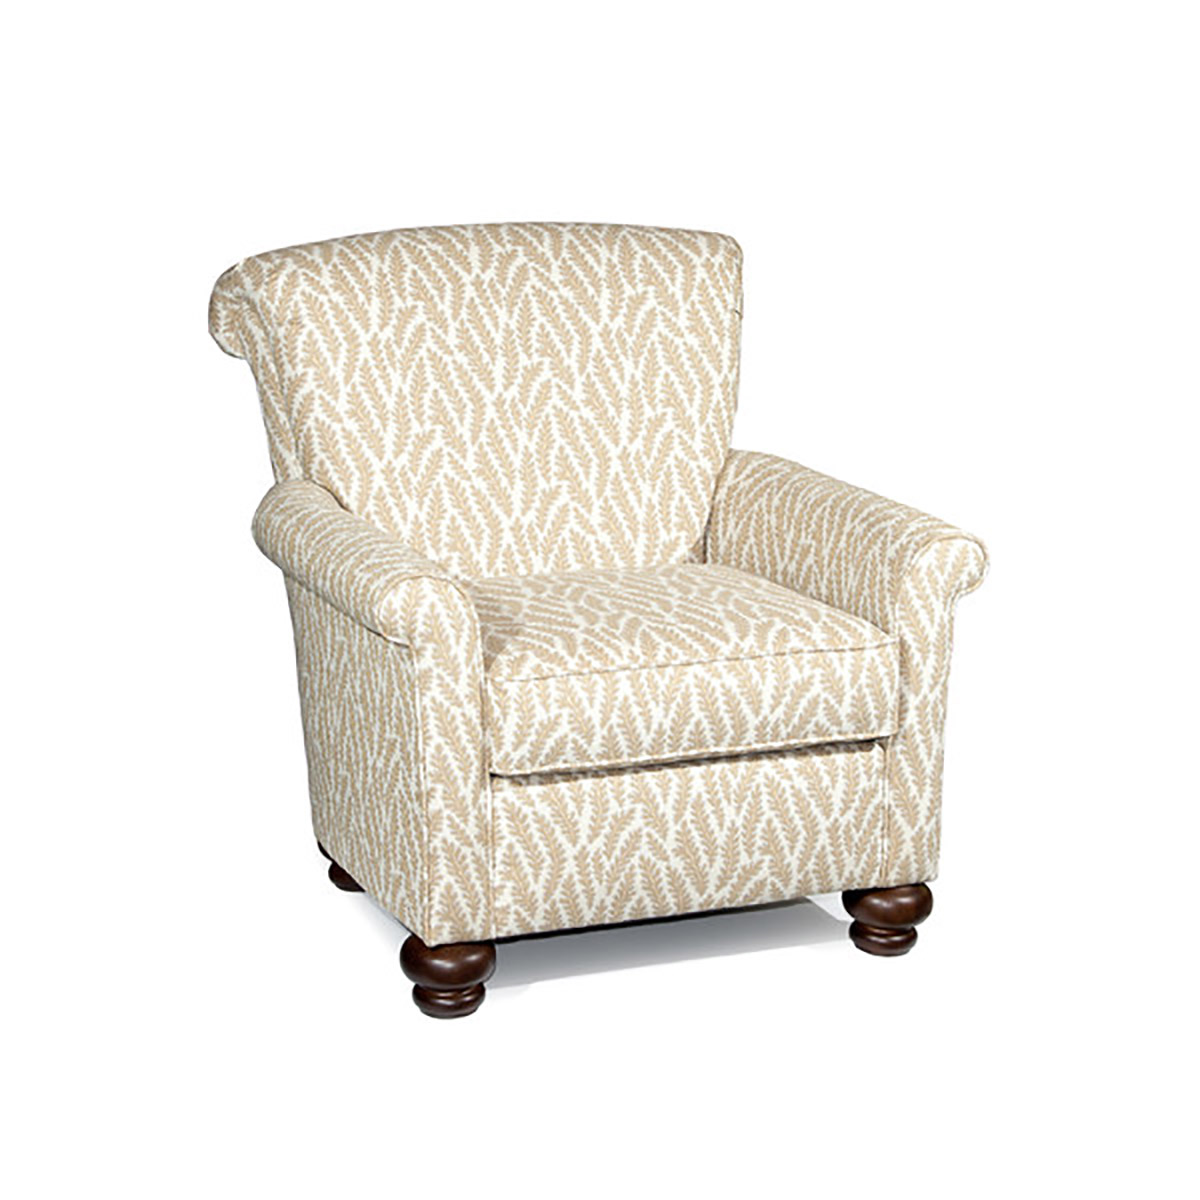 Chelsea Home Jana Accent Chair - Beige/White